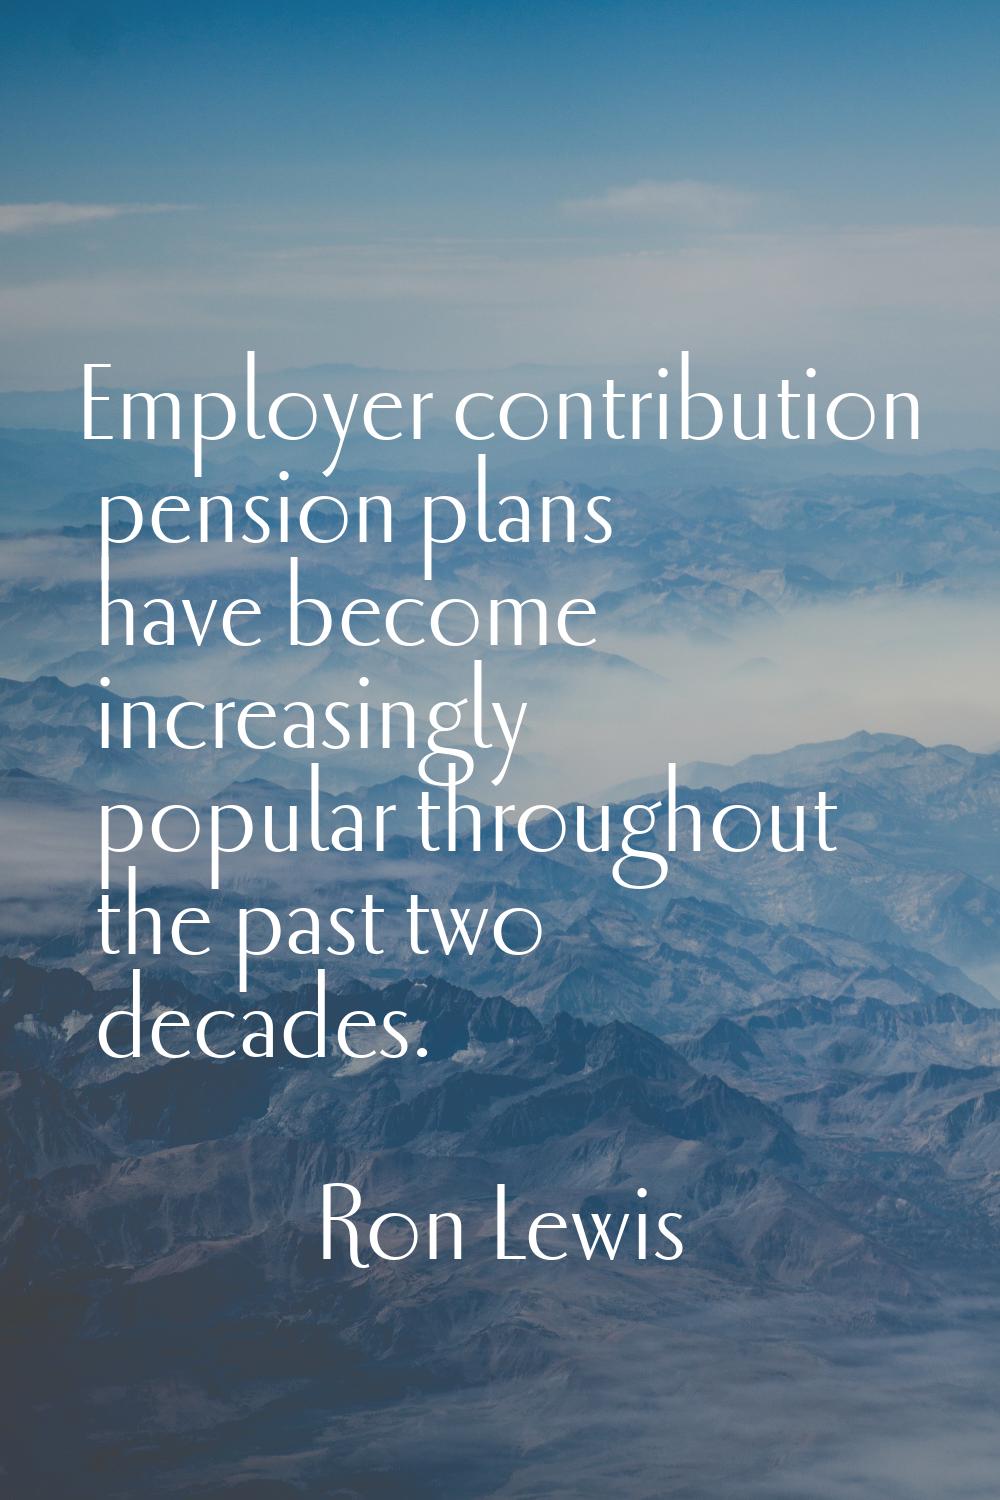 Employer contribution pension plans have become increasingly popular throughout the past two decade